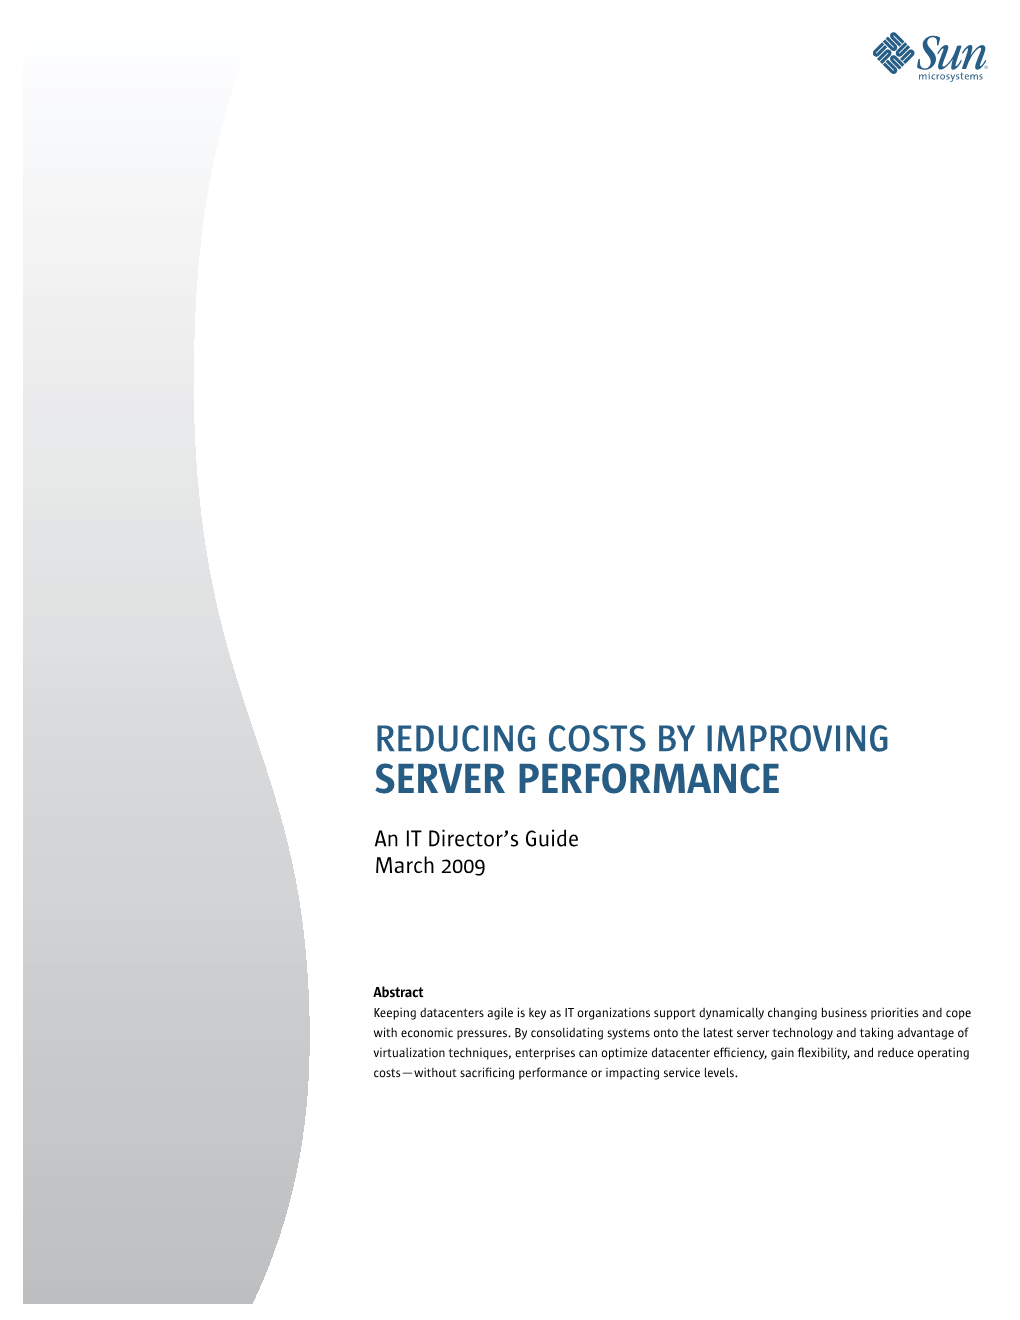 Reducing Costs by Improving Server Performance